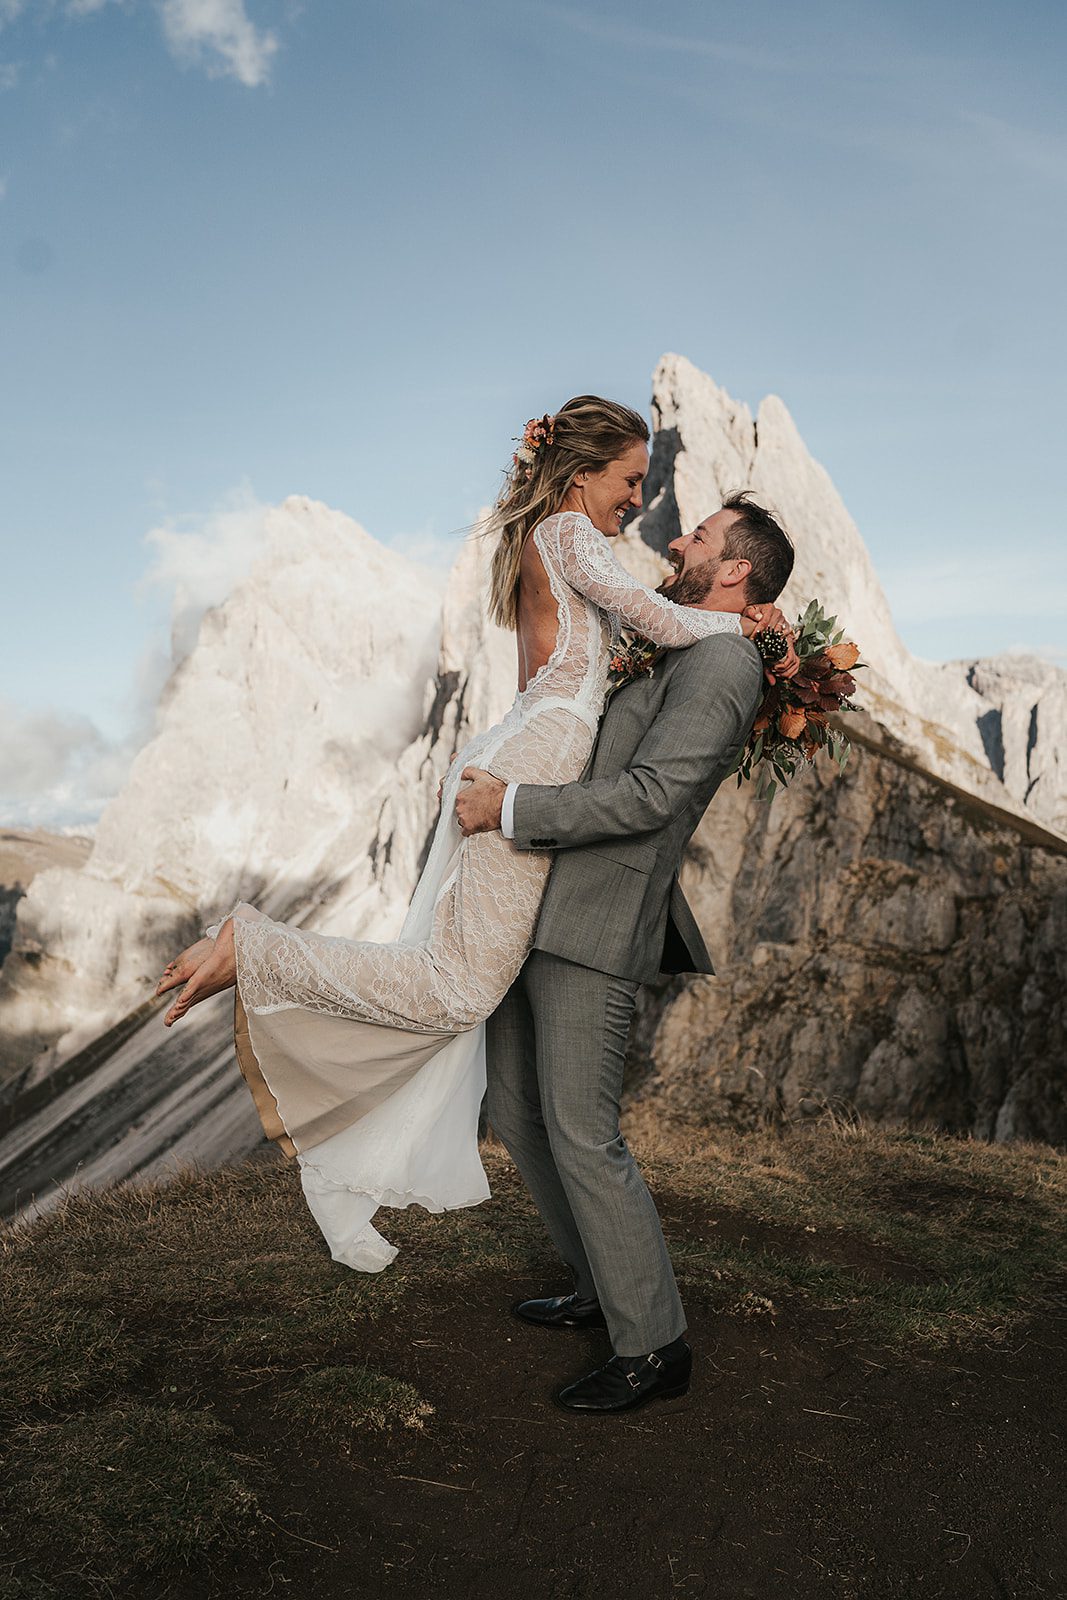 Groom carries bride up in his arms with the view of the breathtaking Seceda mountain in Italy, captured by Blitzkneisser